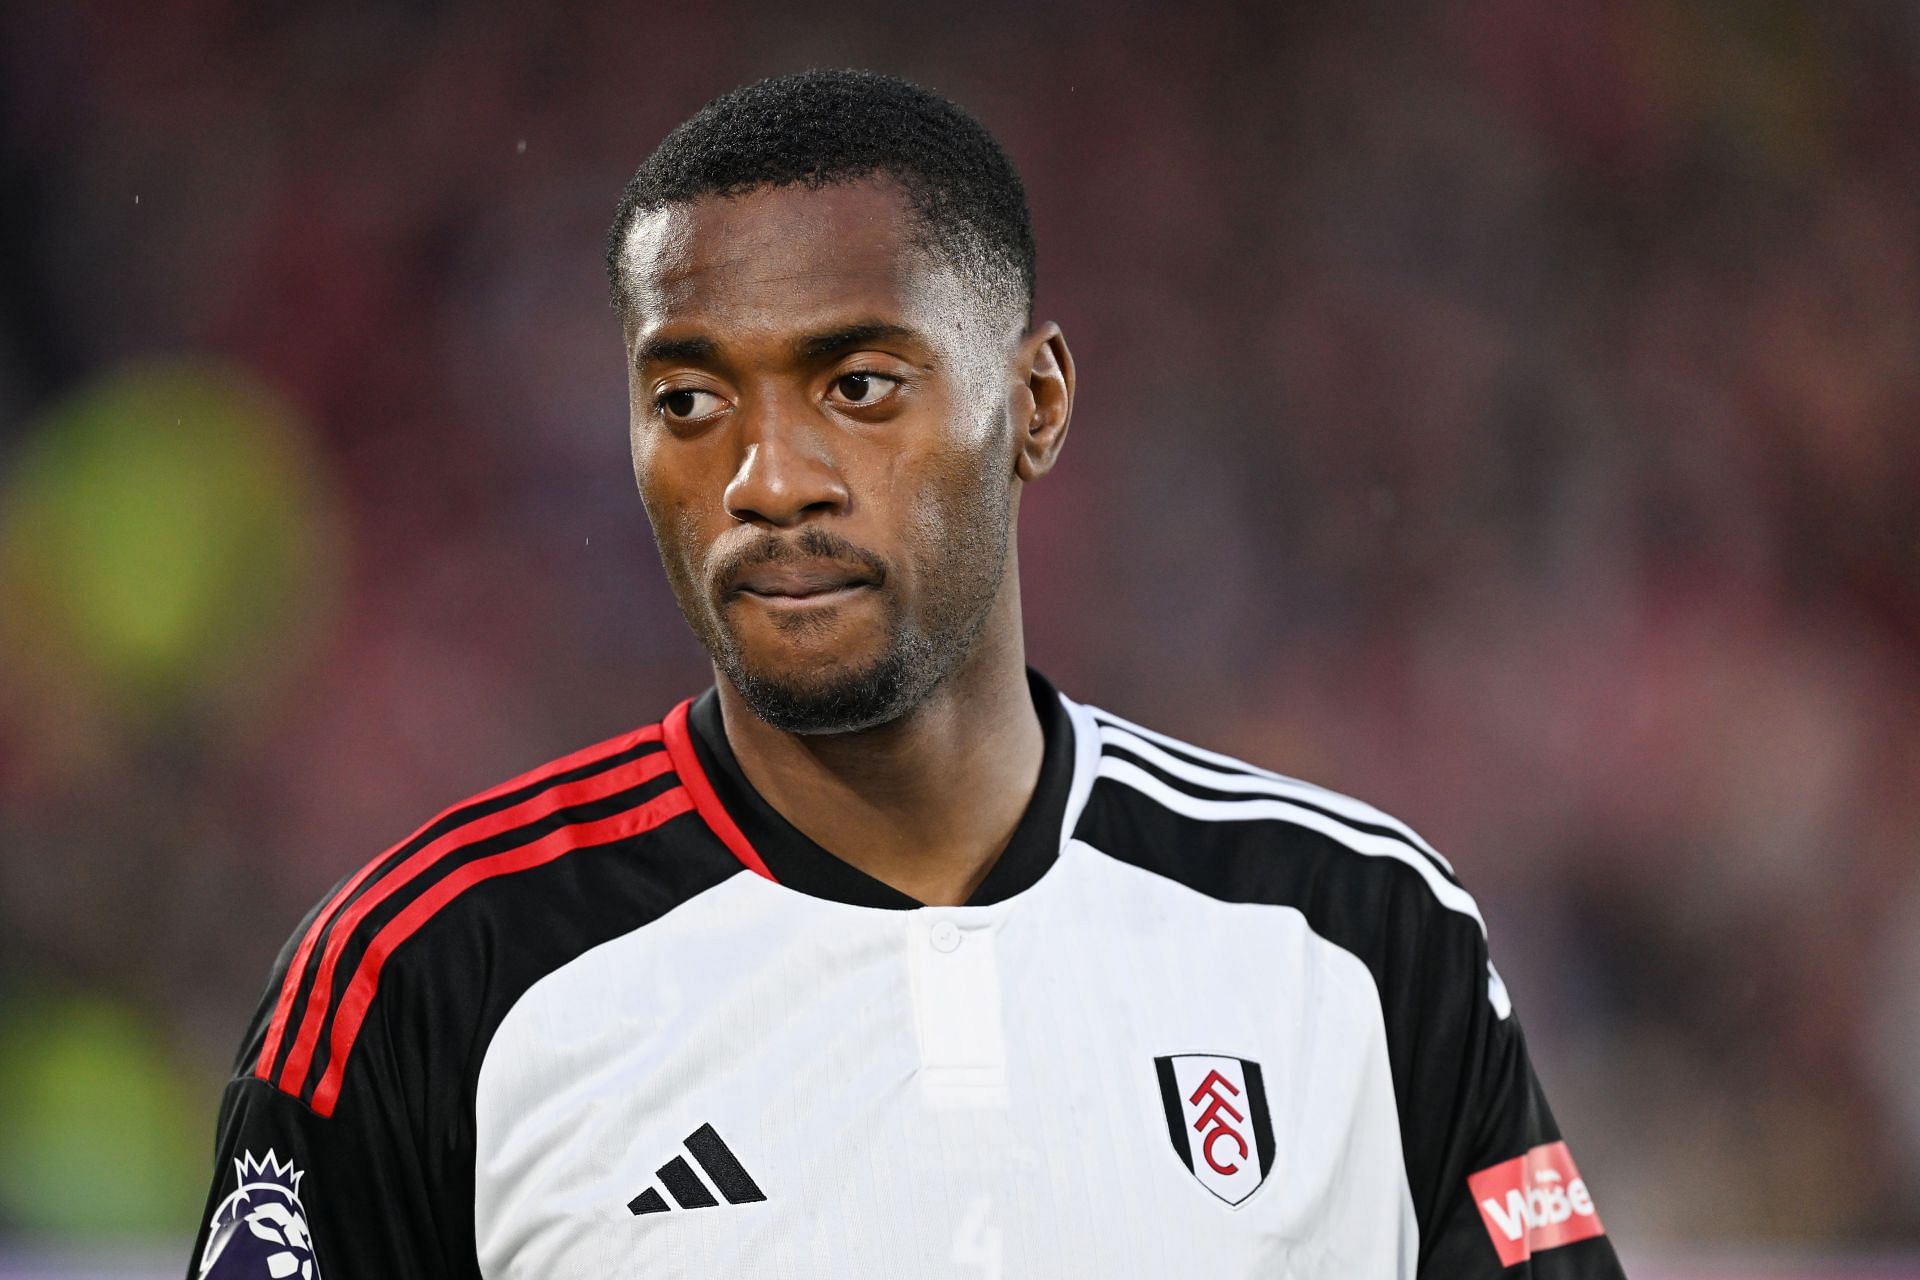 The defender is set to leave Fulham in the summer.